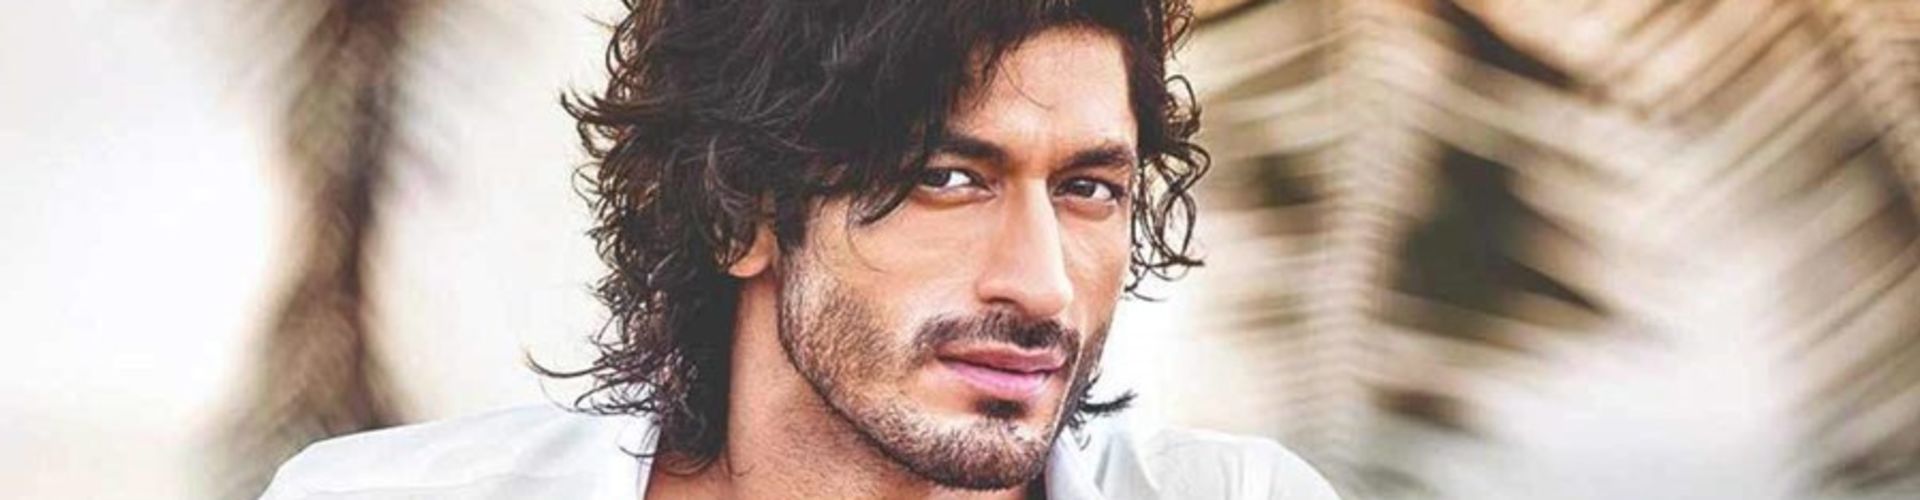 I Am Here To Create My Own Path, I Don’t Follow Anyone Says Vidyut Jammwal